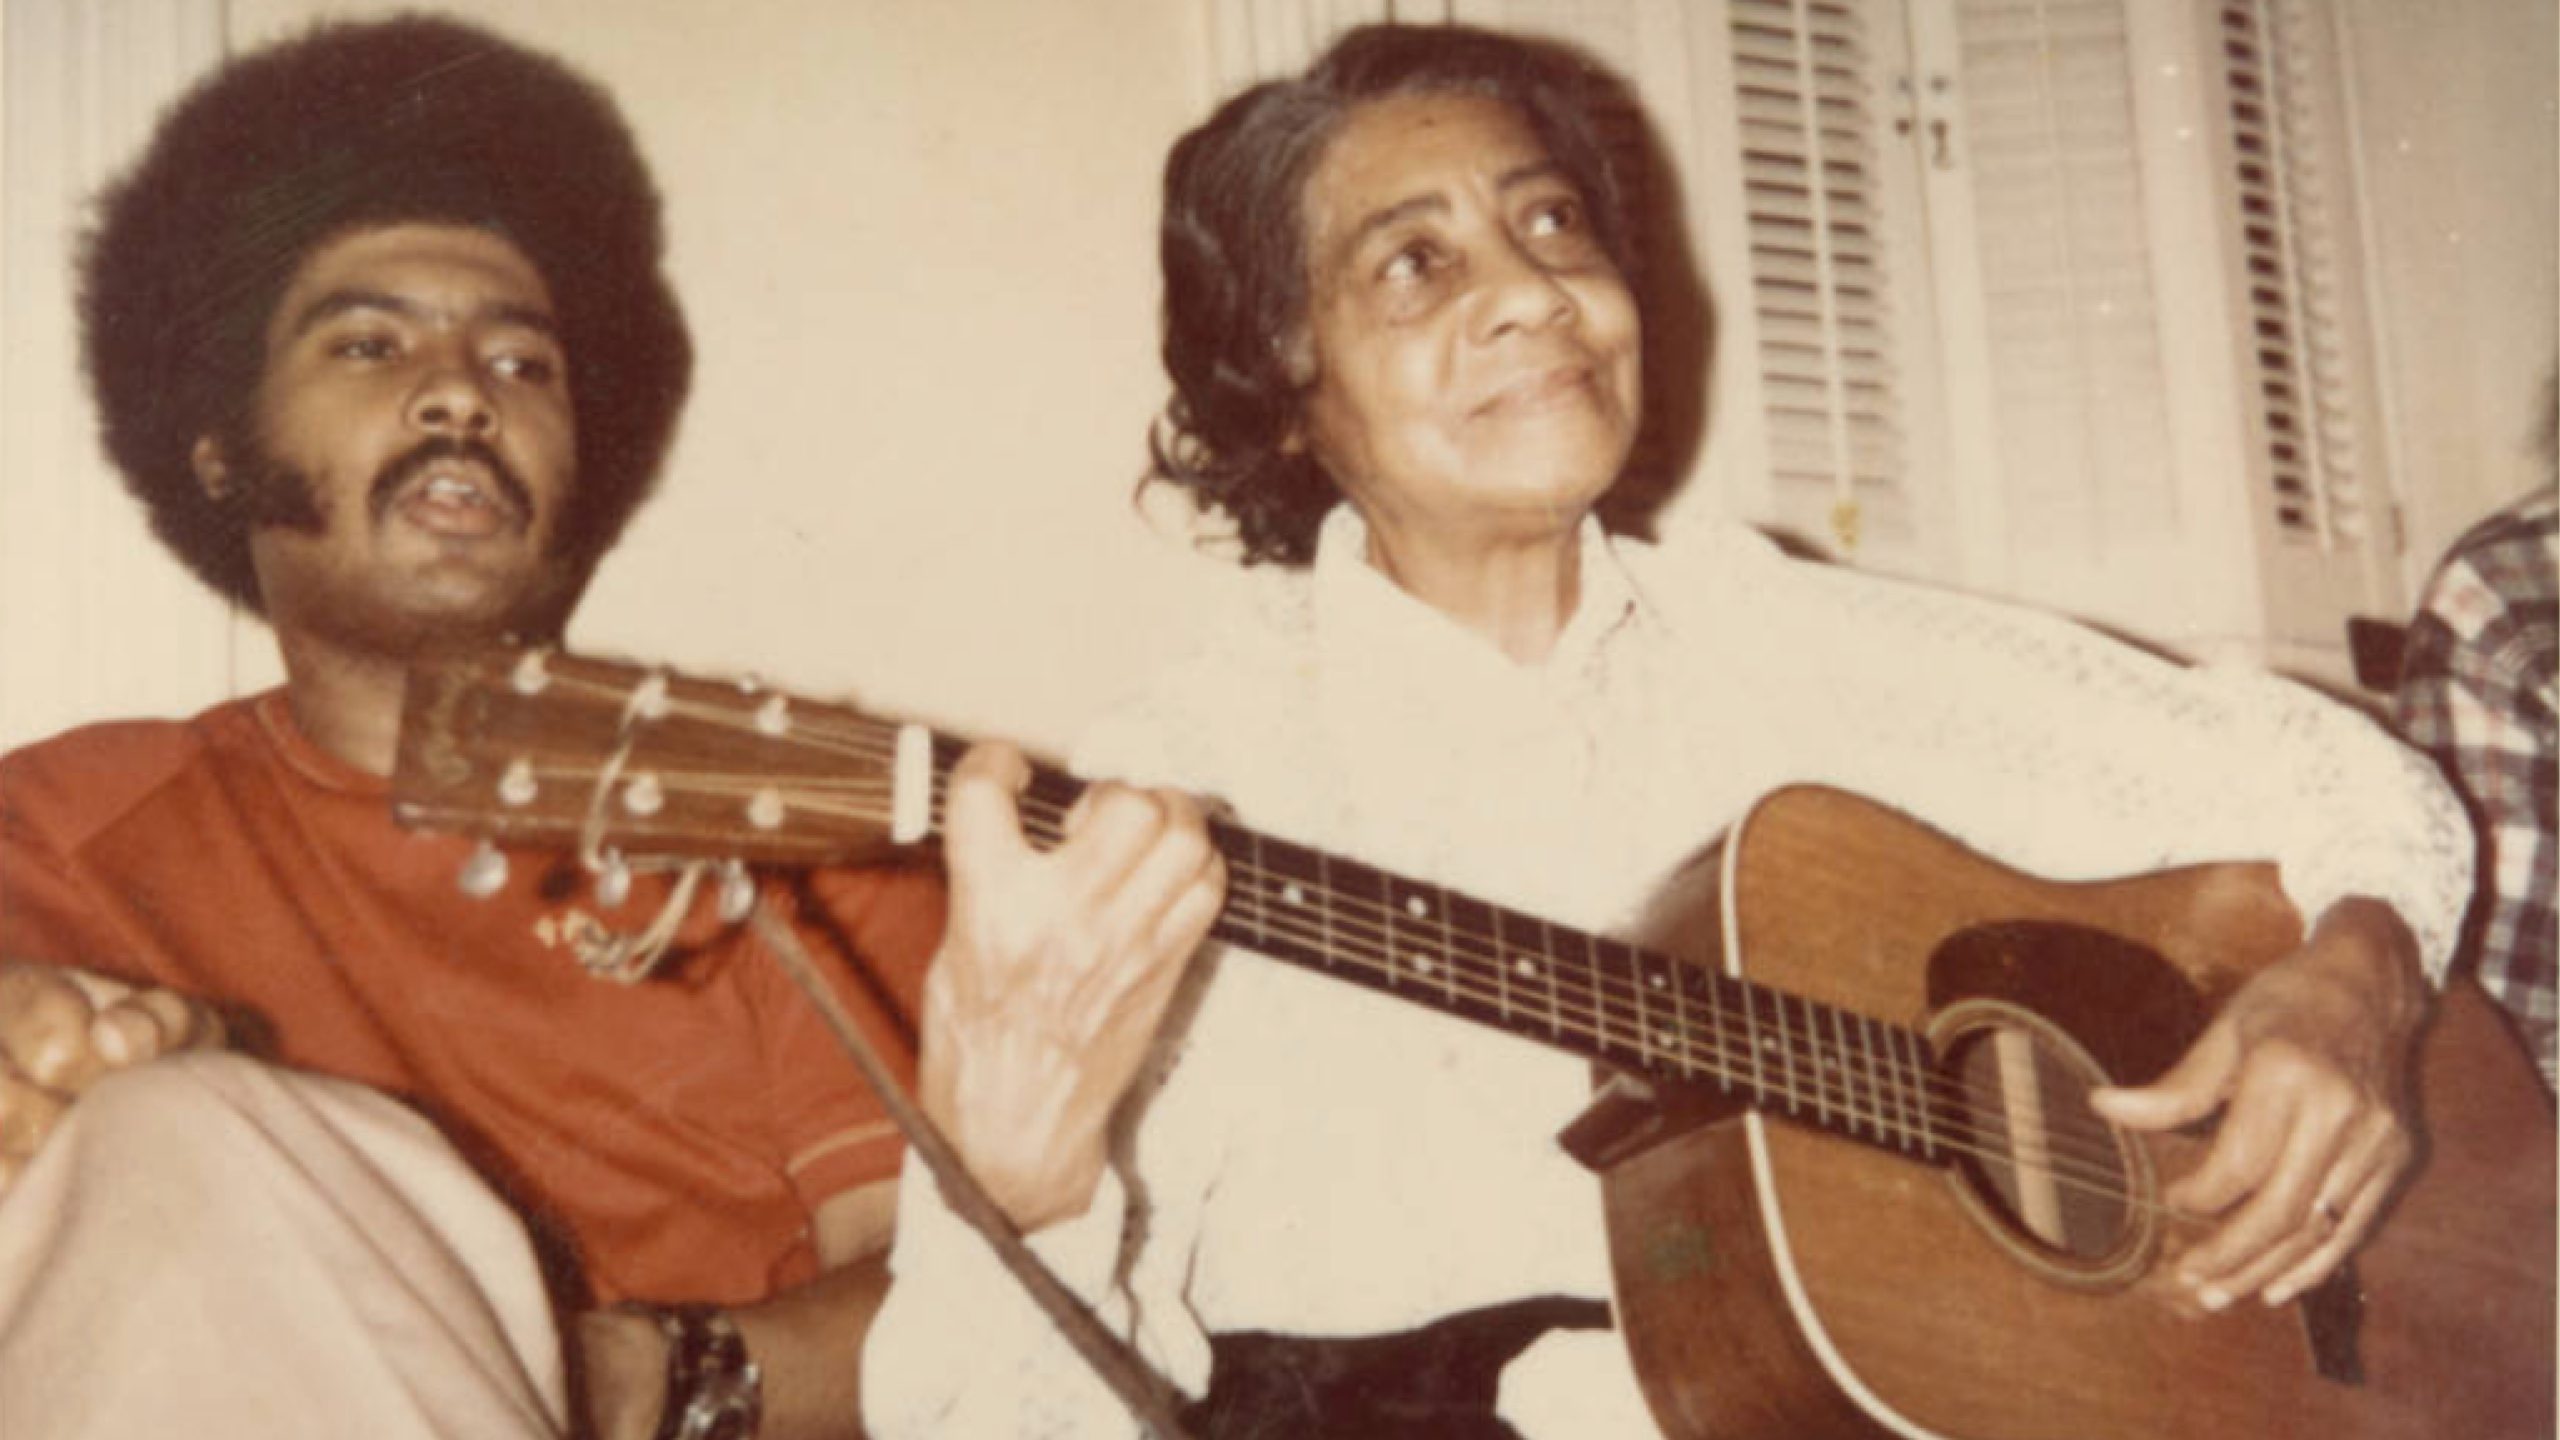 Elizabeth Cotten holding her guitar, Sparky Rucker on the left. Photo from Mike Seeger Collection